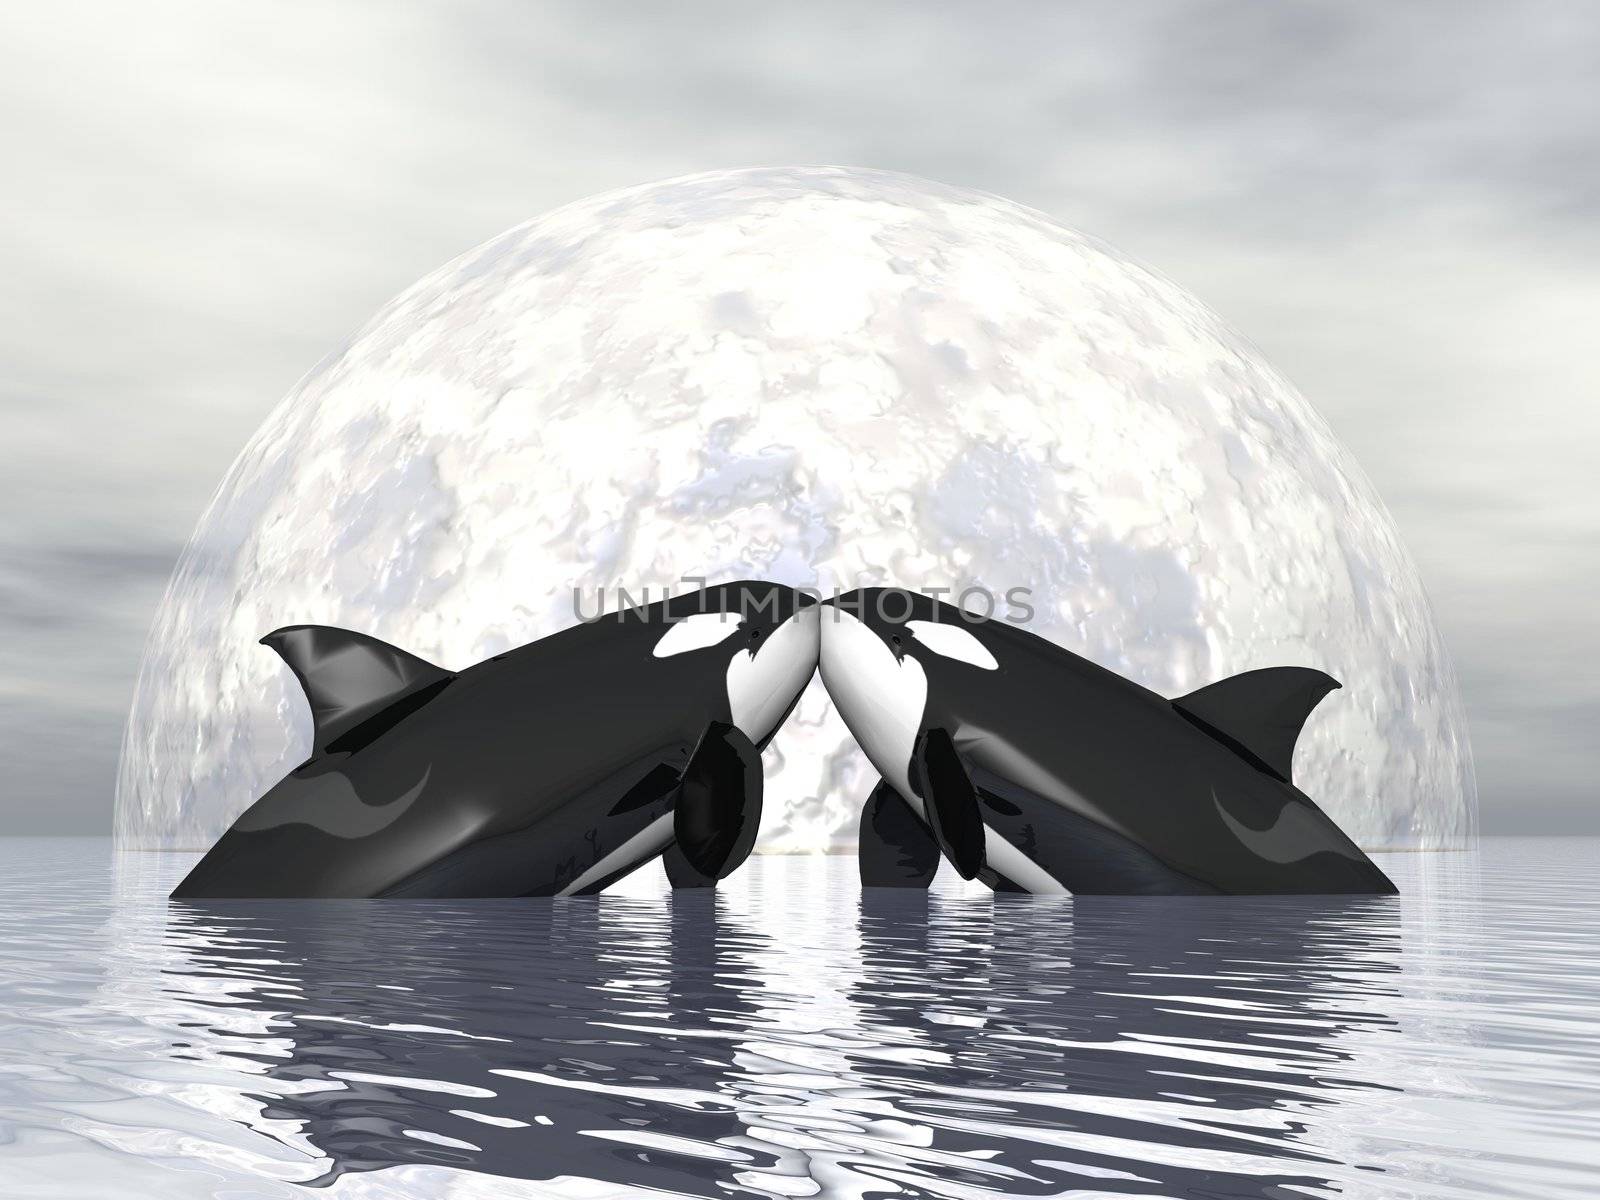 Couple of orca kissing in front of the moon